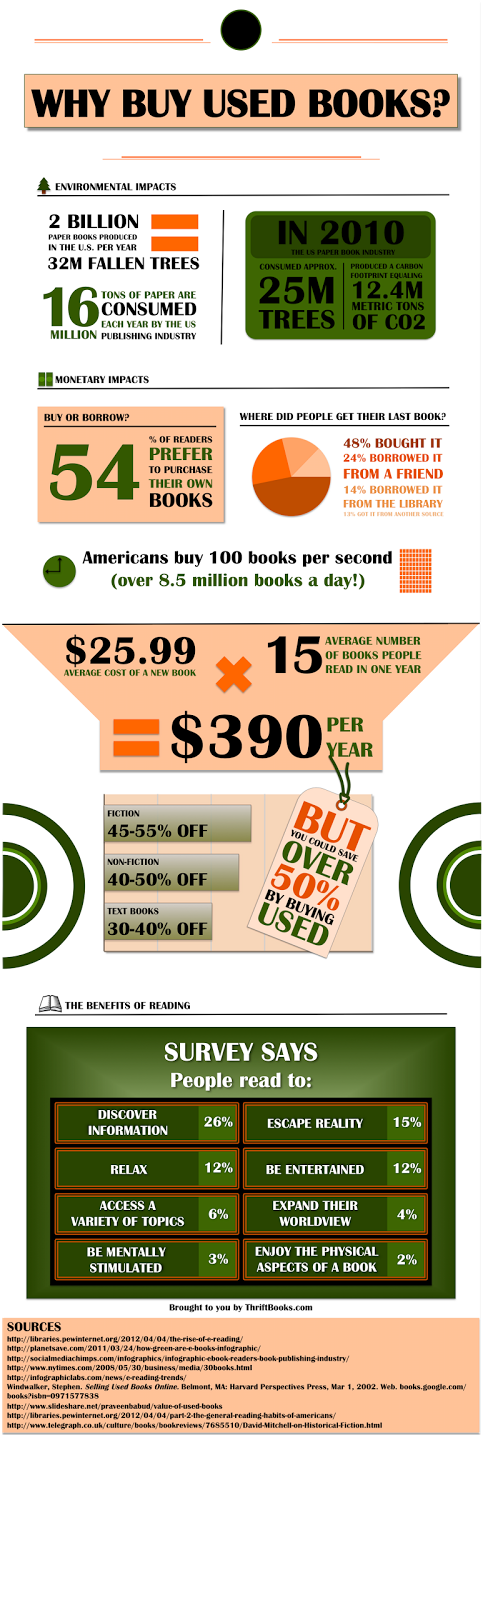 Why Buy Used Books - TB - graphic